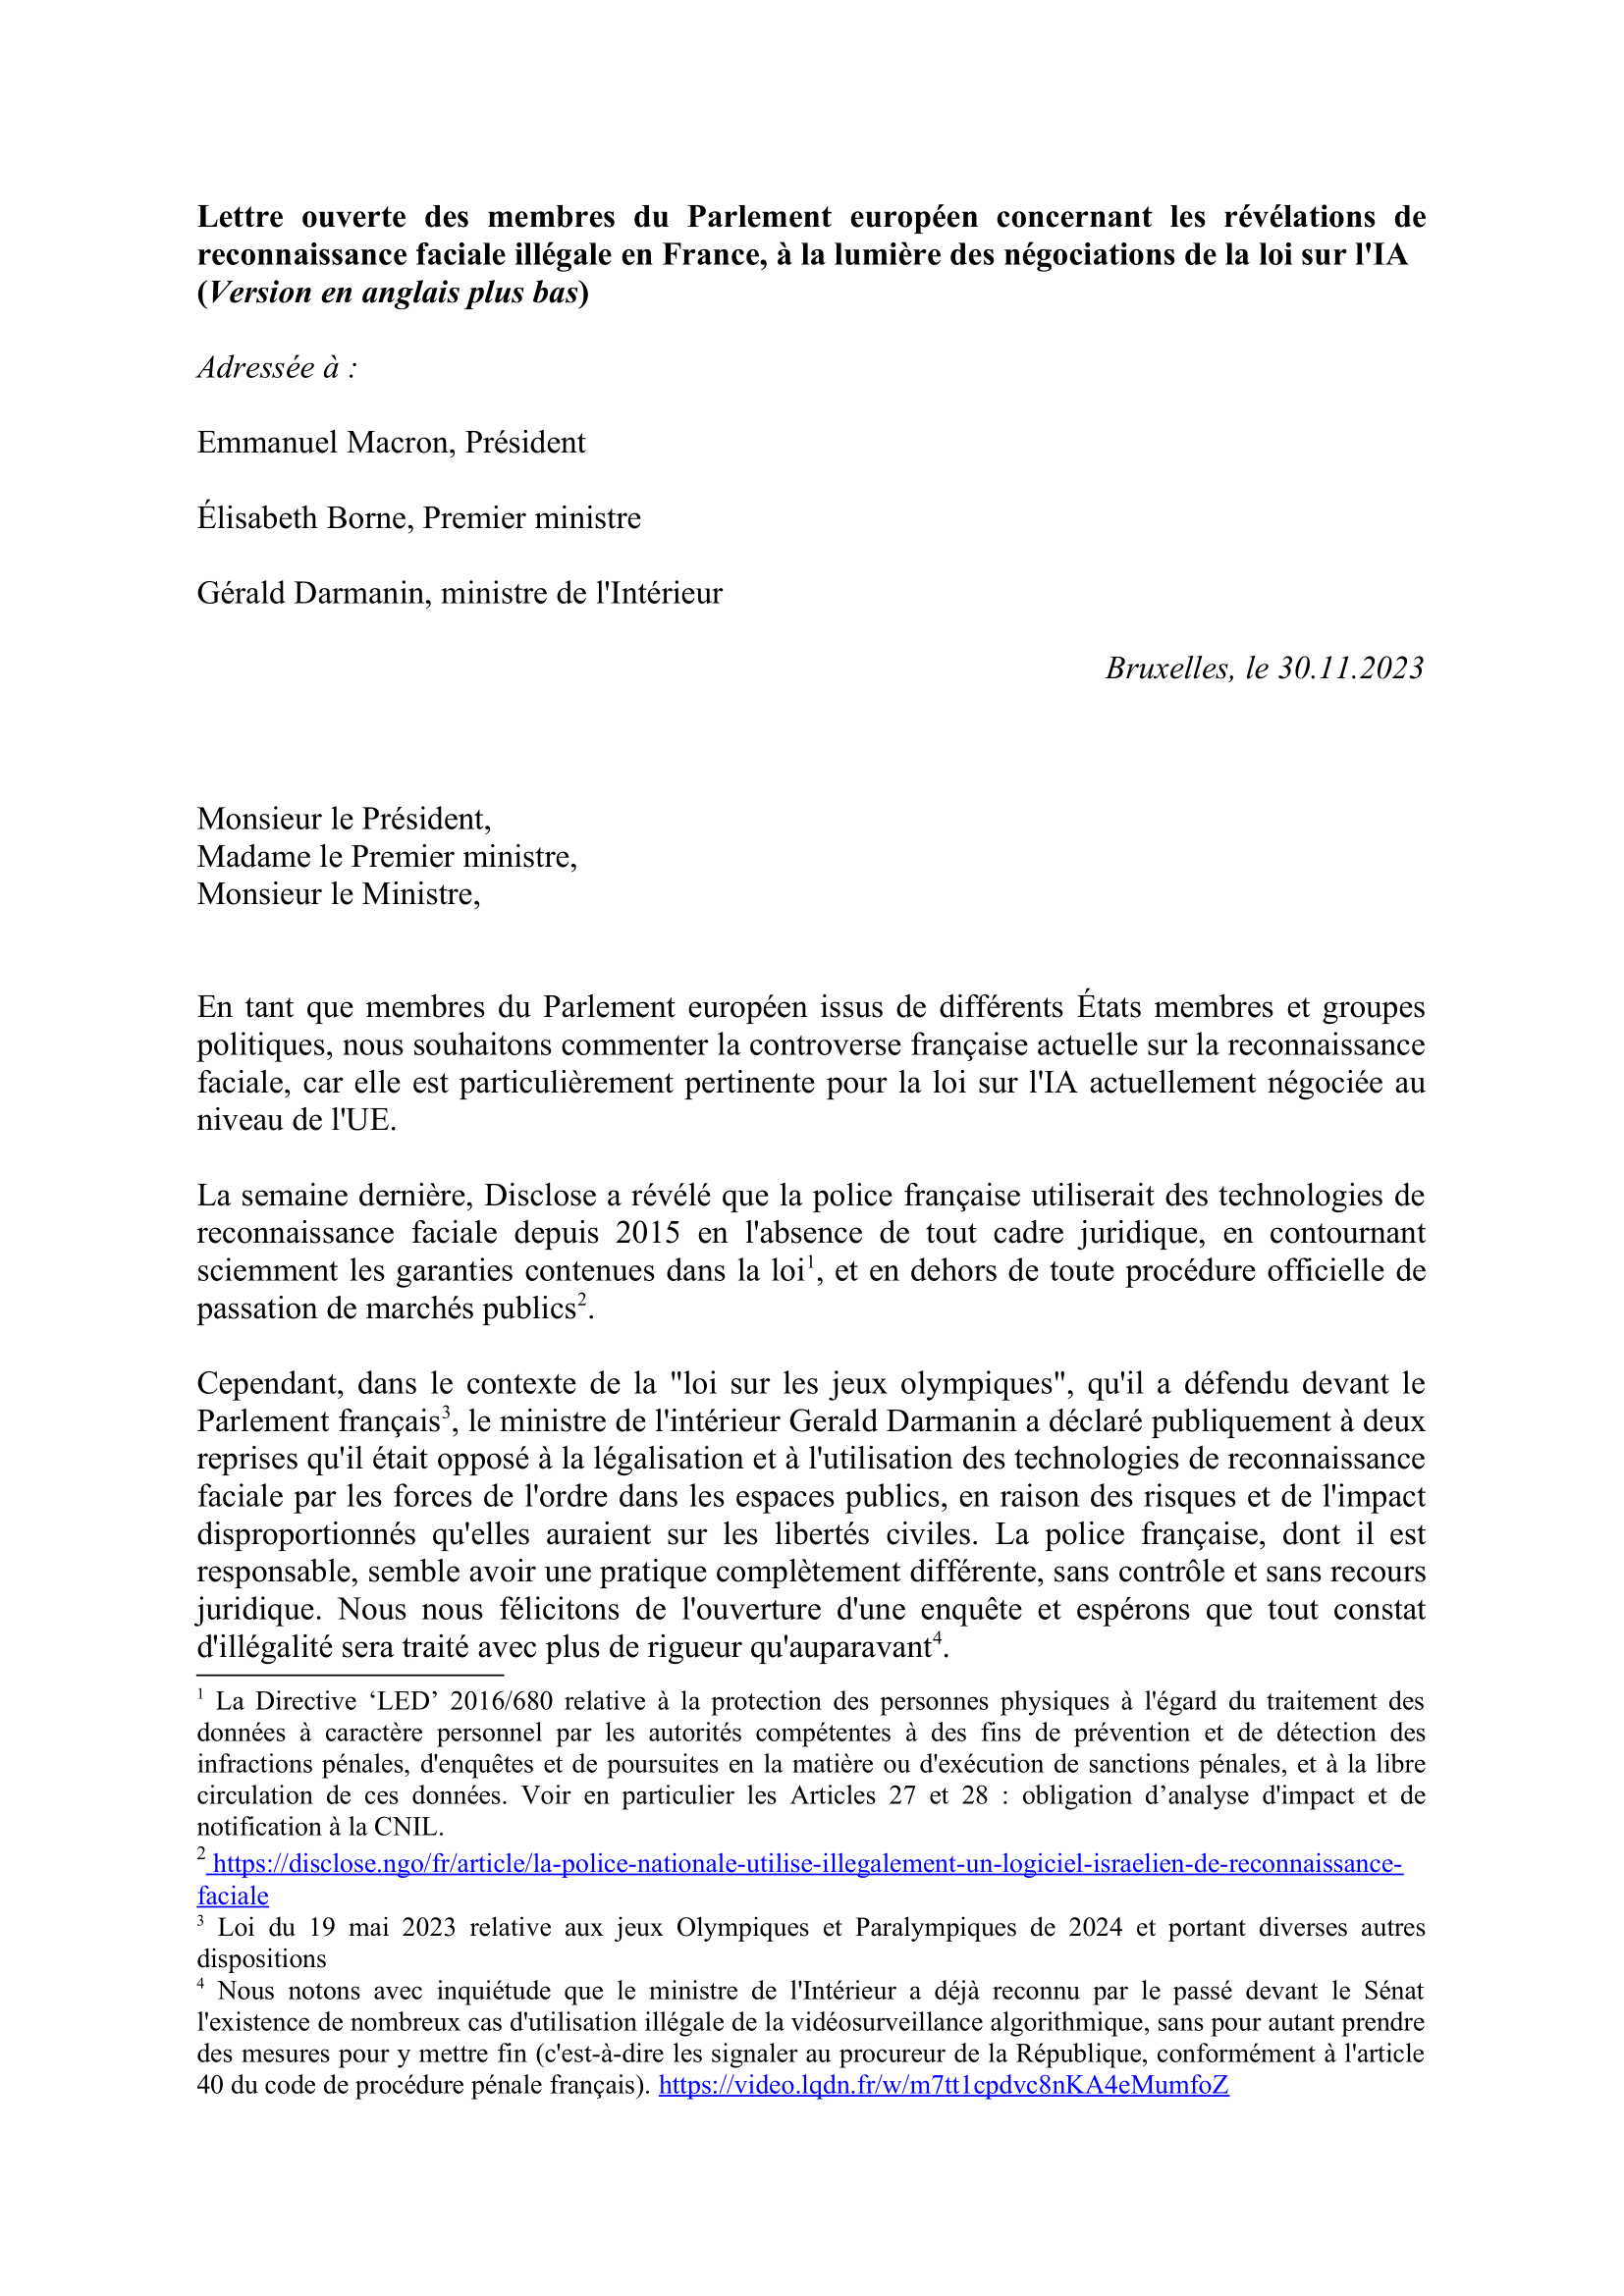 mep-open-letter-regarding-the-revelations-of-illegal-use-of-facial-recognition-in-france-1-1.png